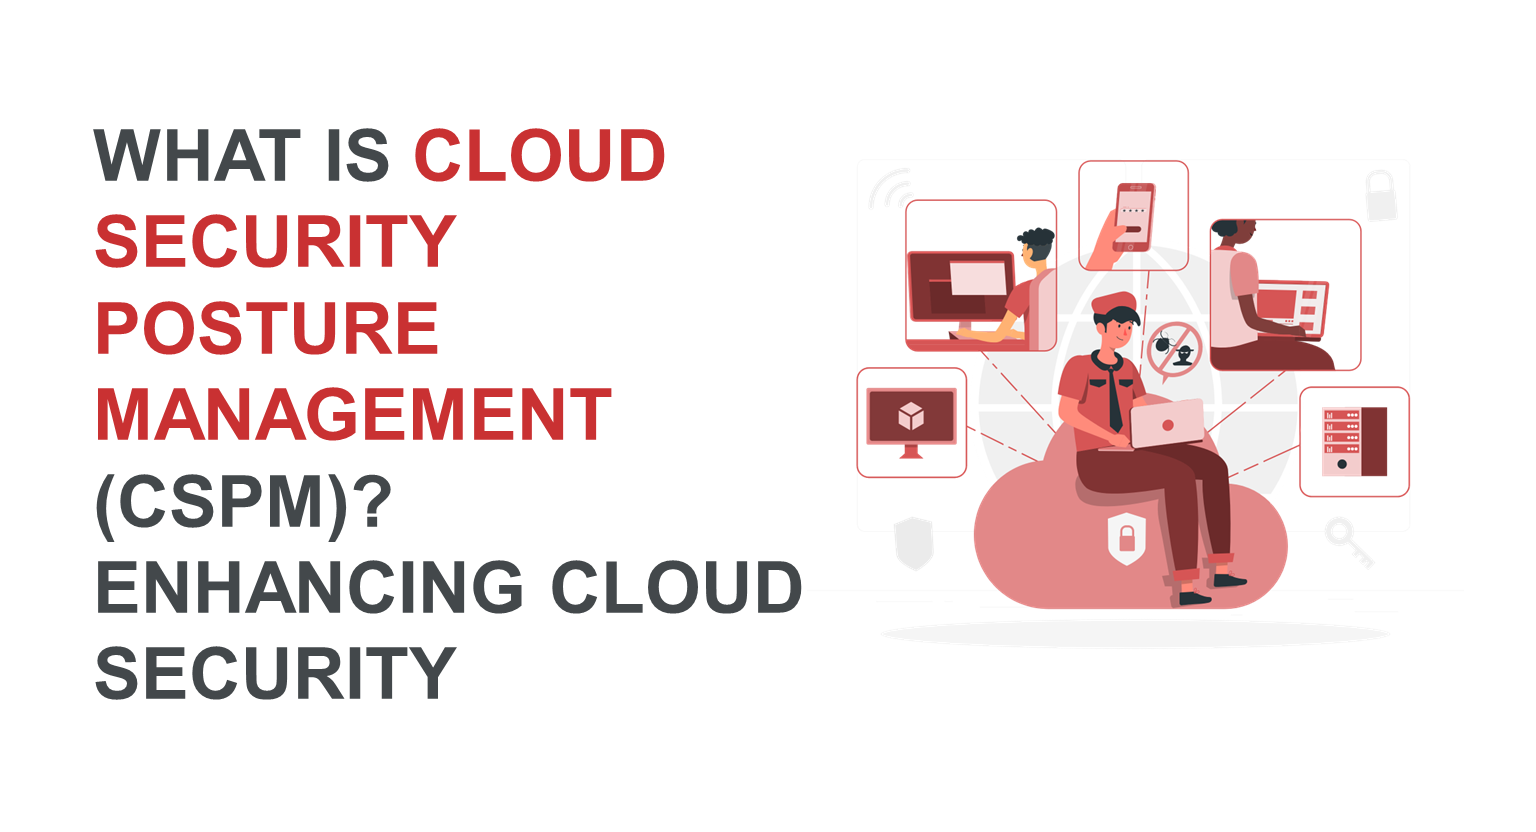 What is Cloud Security Posture Management (CSPM)? Enhancing Cloud Security